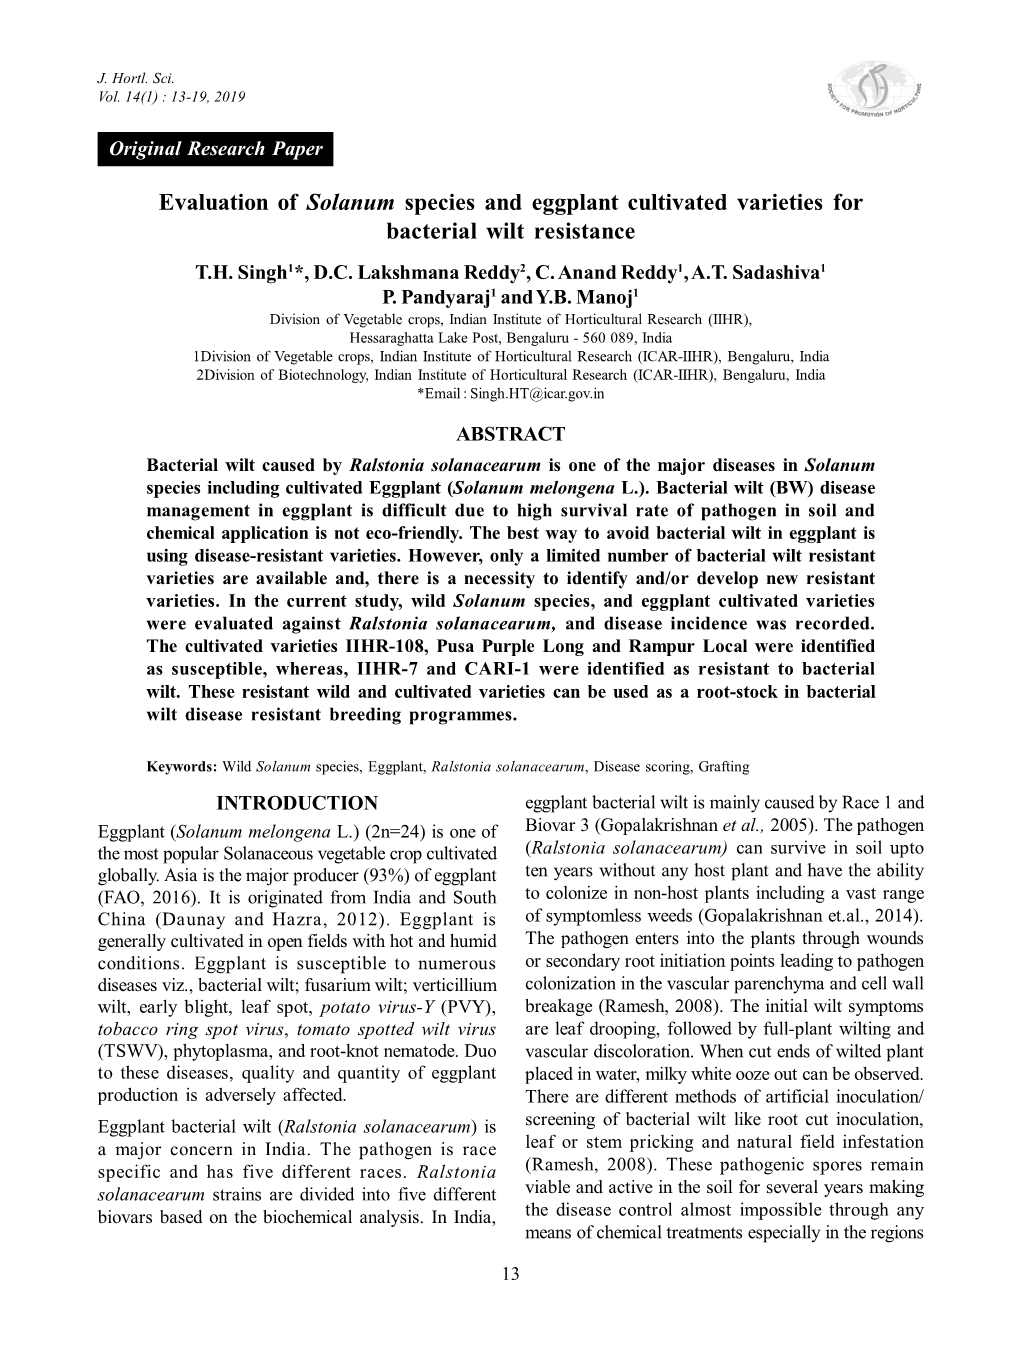 Evaluation of Solanum Species and Eggplant Cultivated Varieties for Bacterial Wilt Resistance T.H